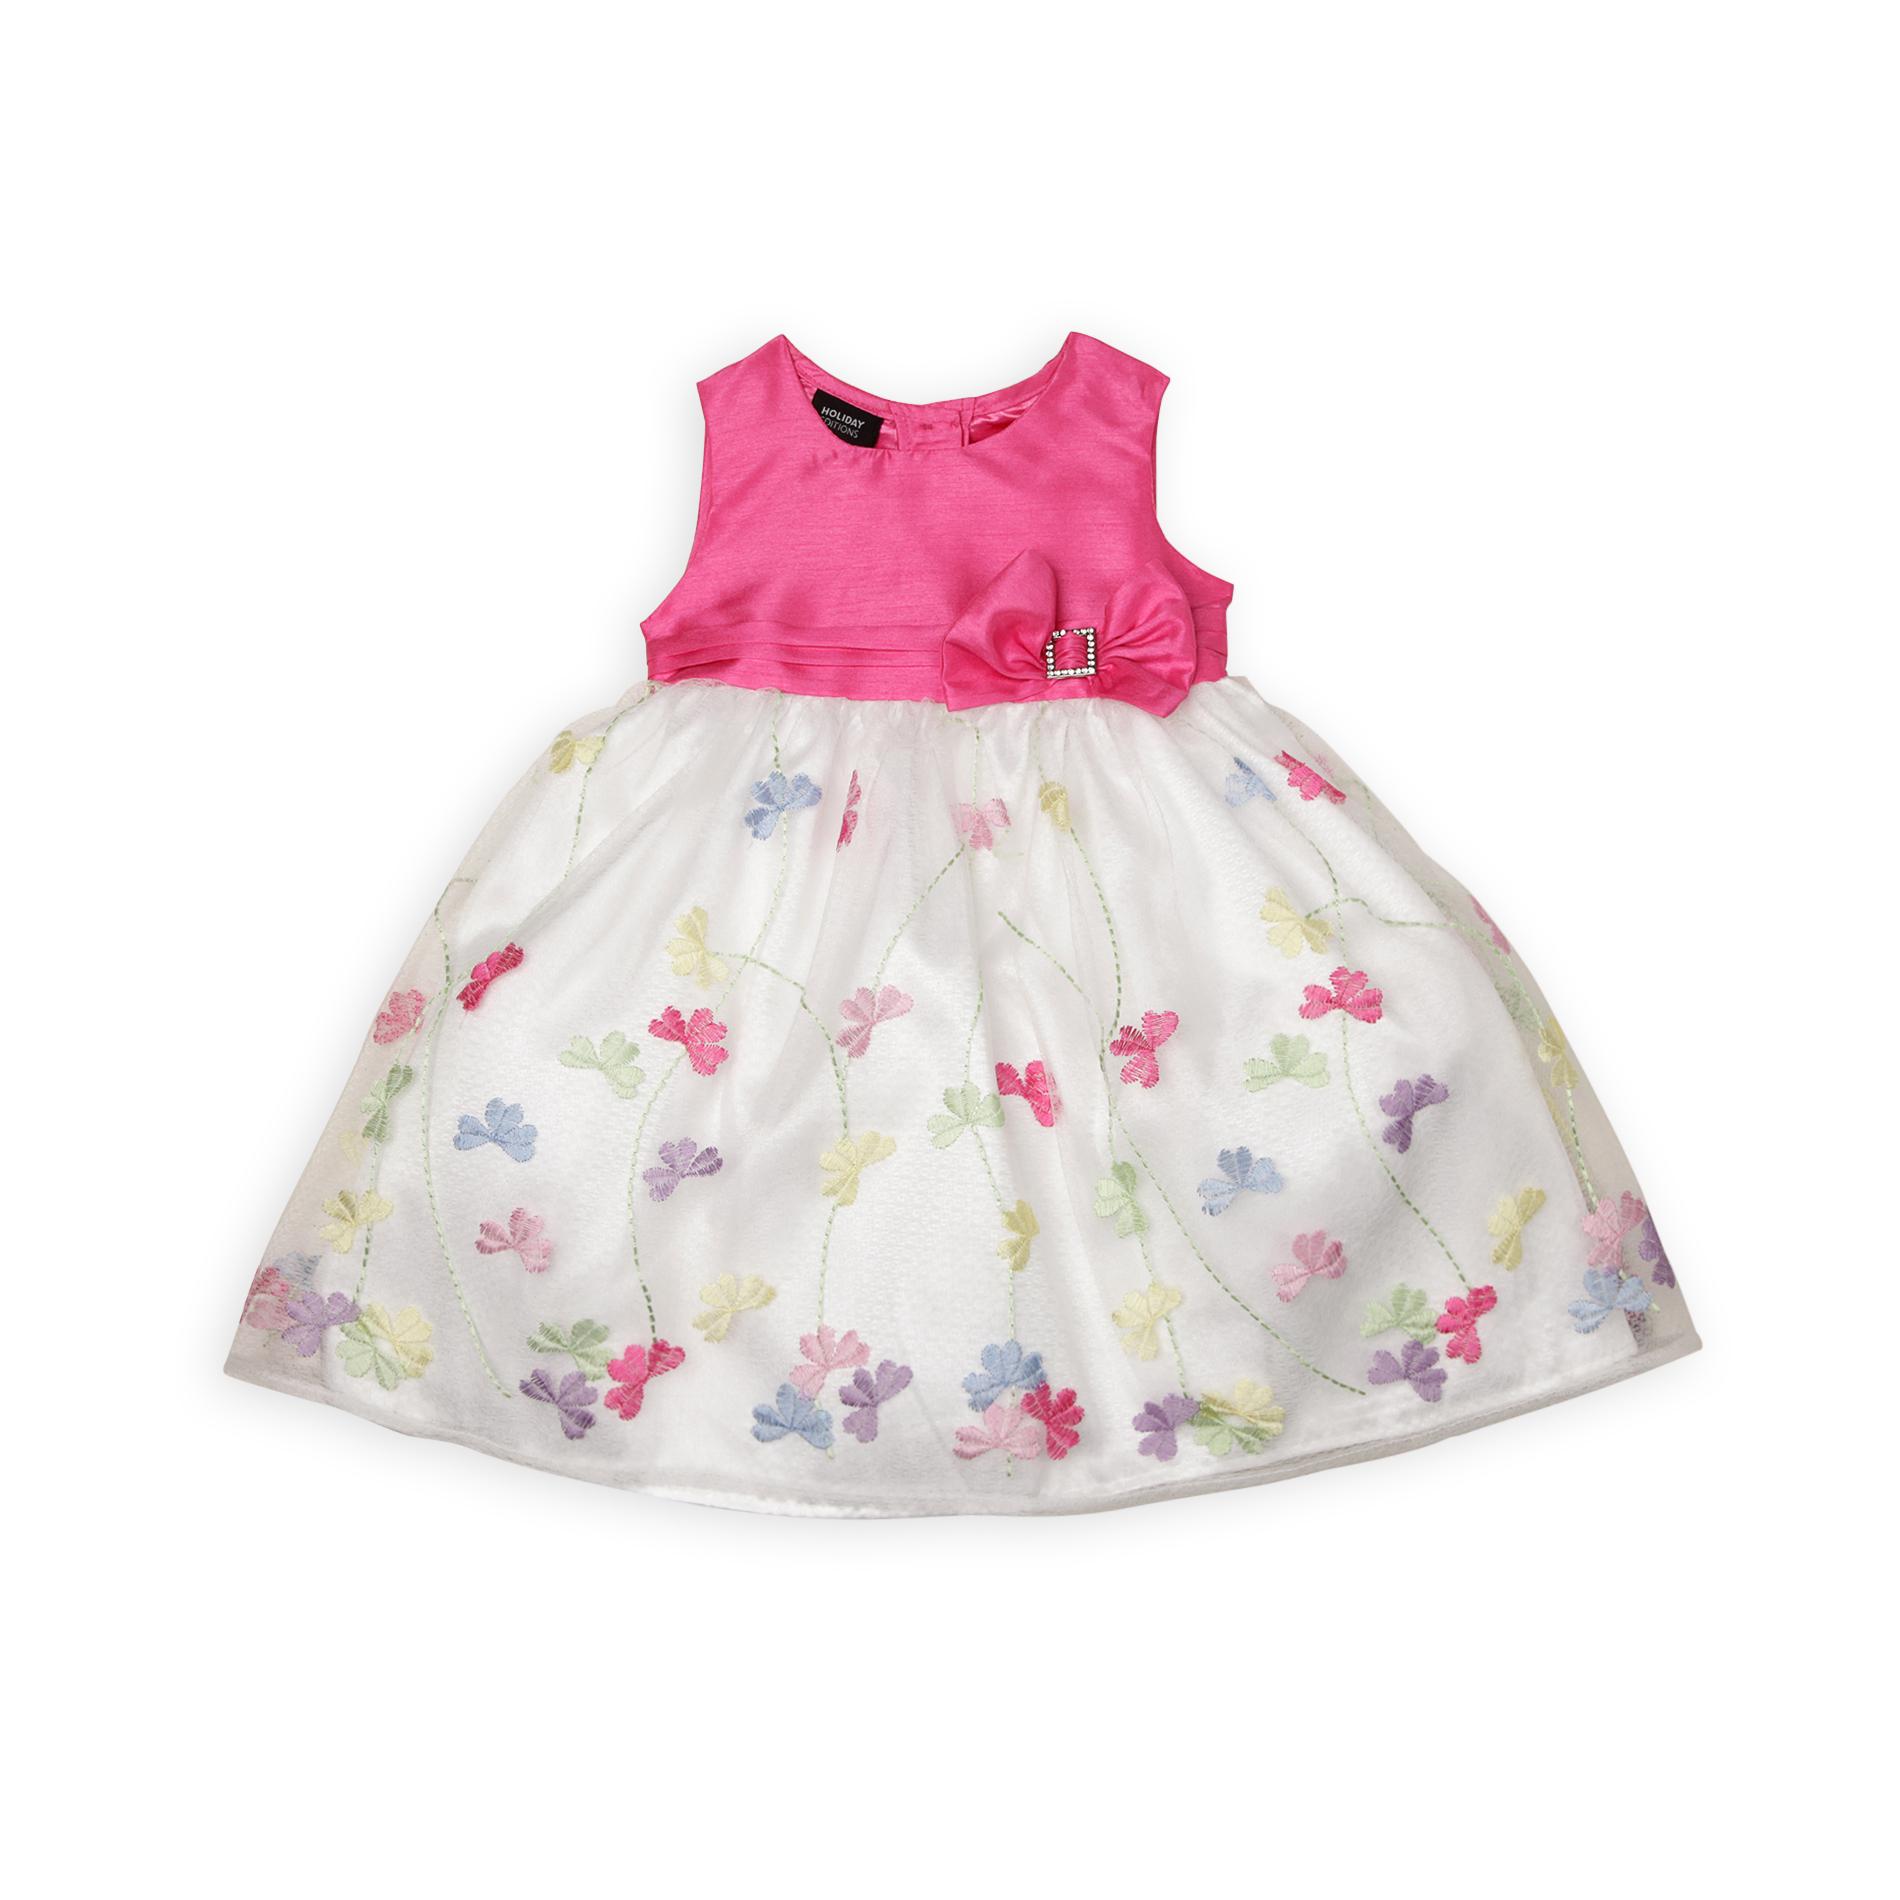 Holiday Editions Infant & Toddler Girl's Sleeveless Occasion Dress - Floral